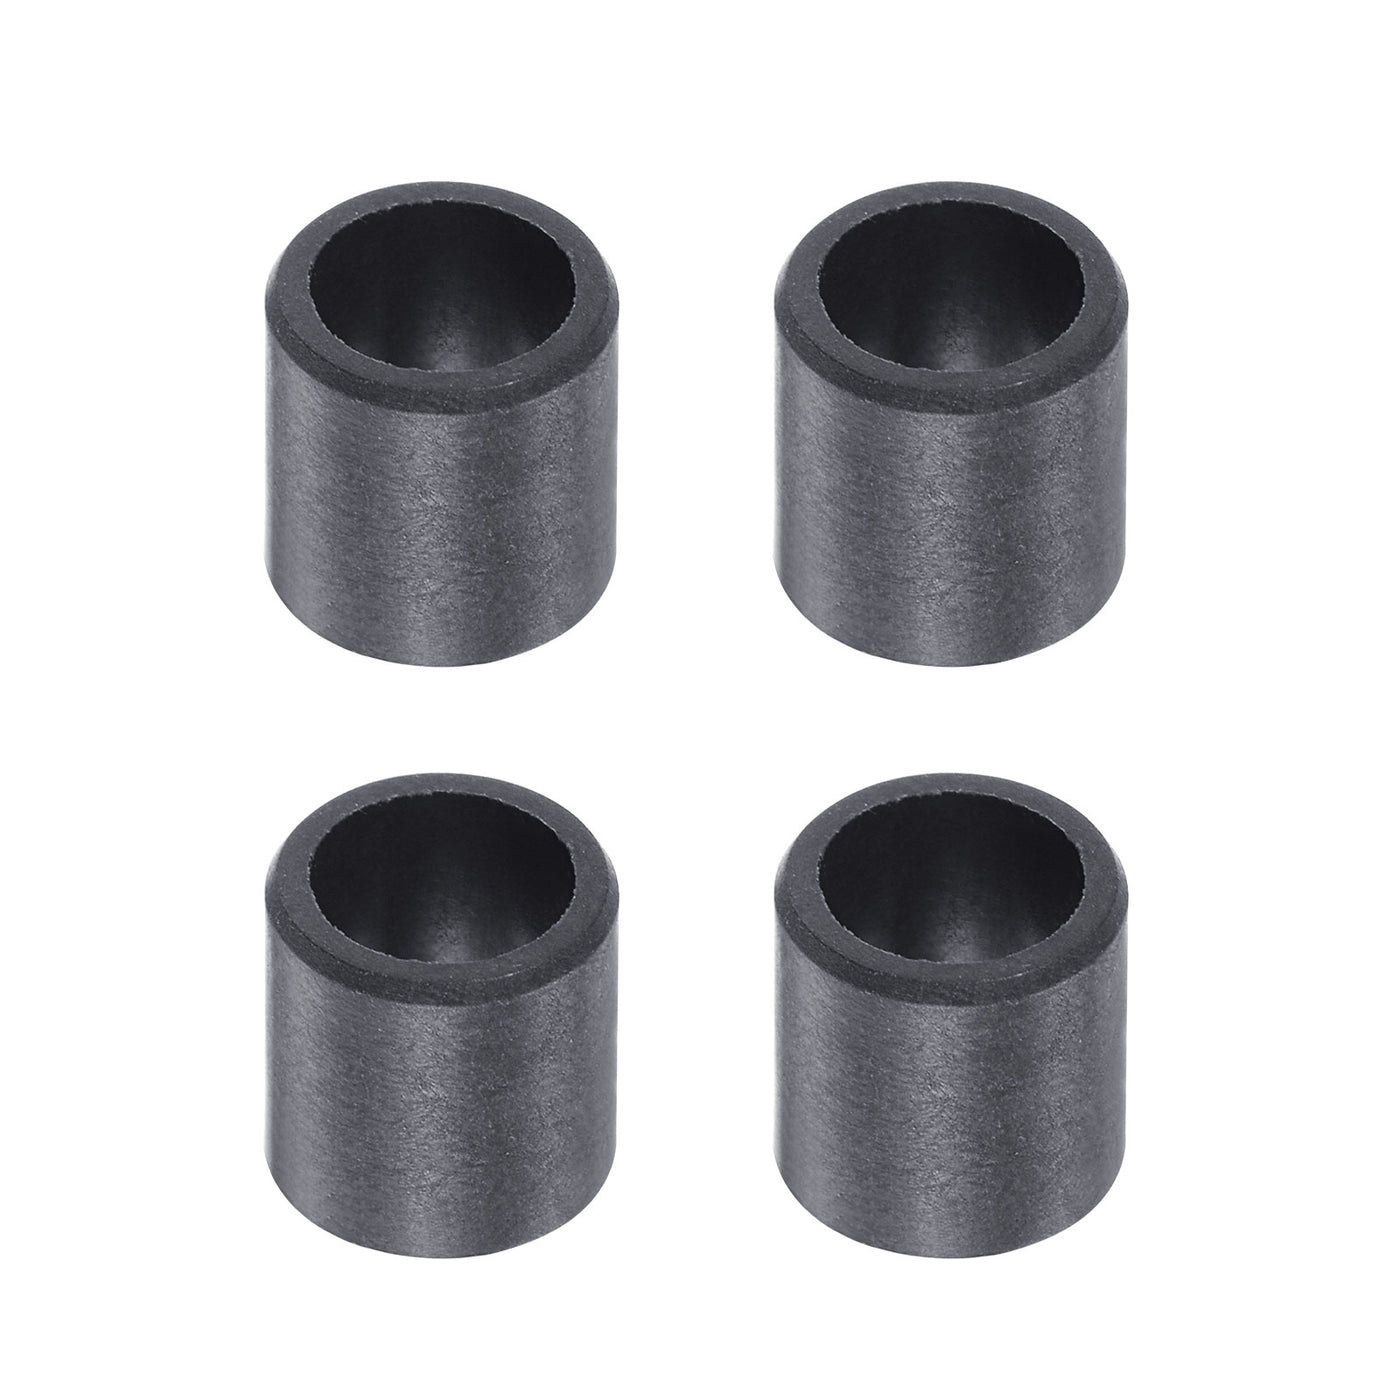 uxcell Uxcell Sleeve Bearings 6mmx8mmx8mm POM Wrapped Oilless Bushings Black 4pcs